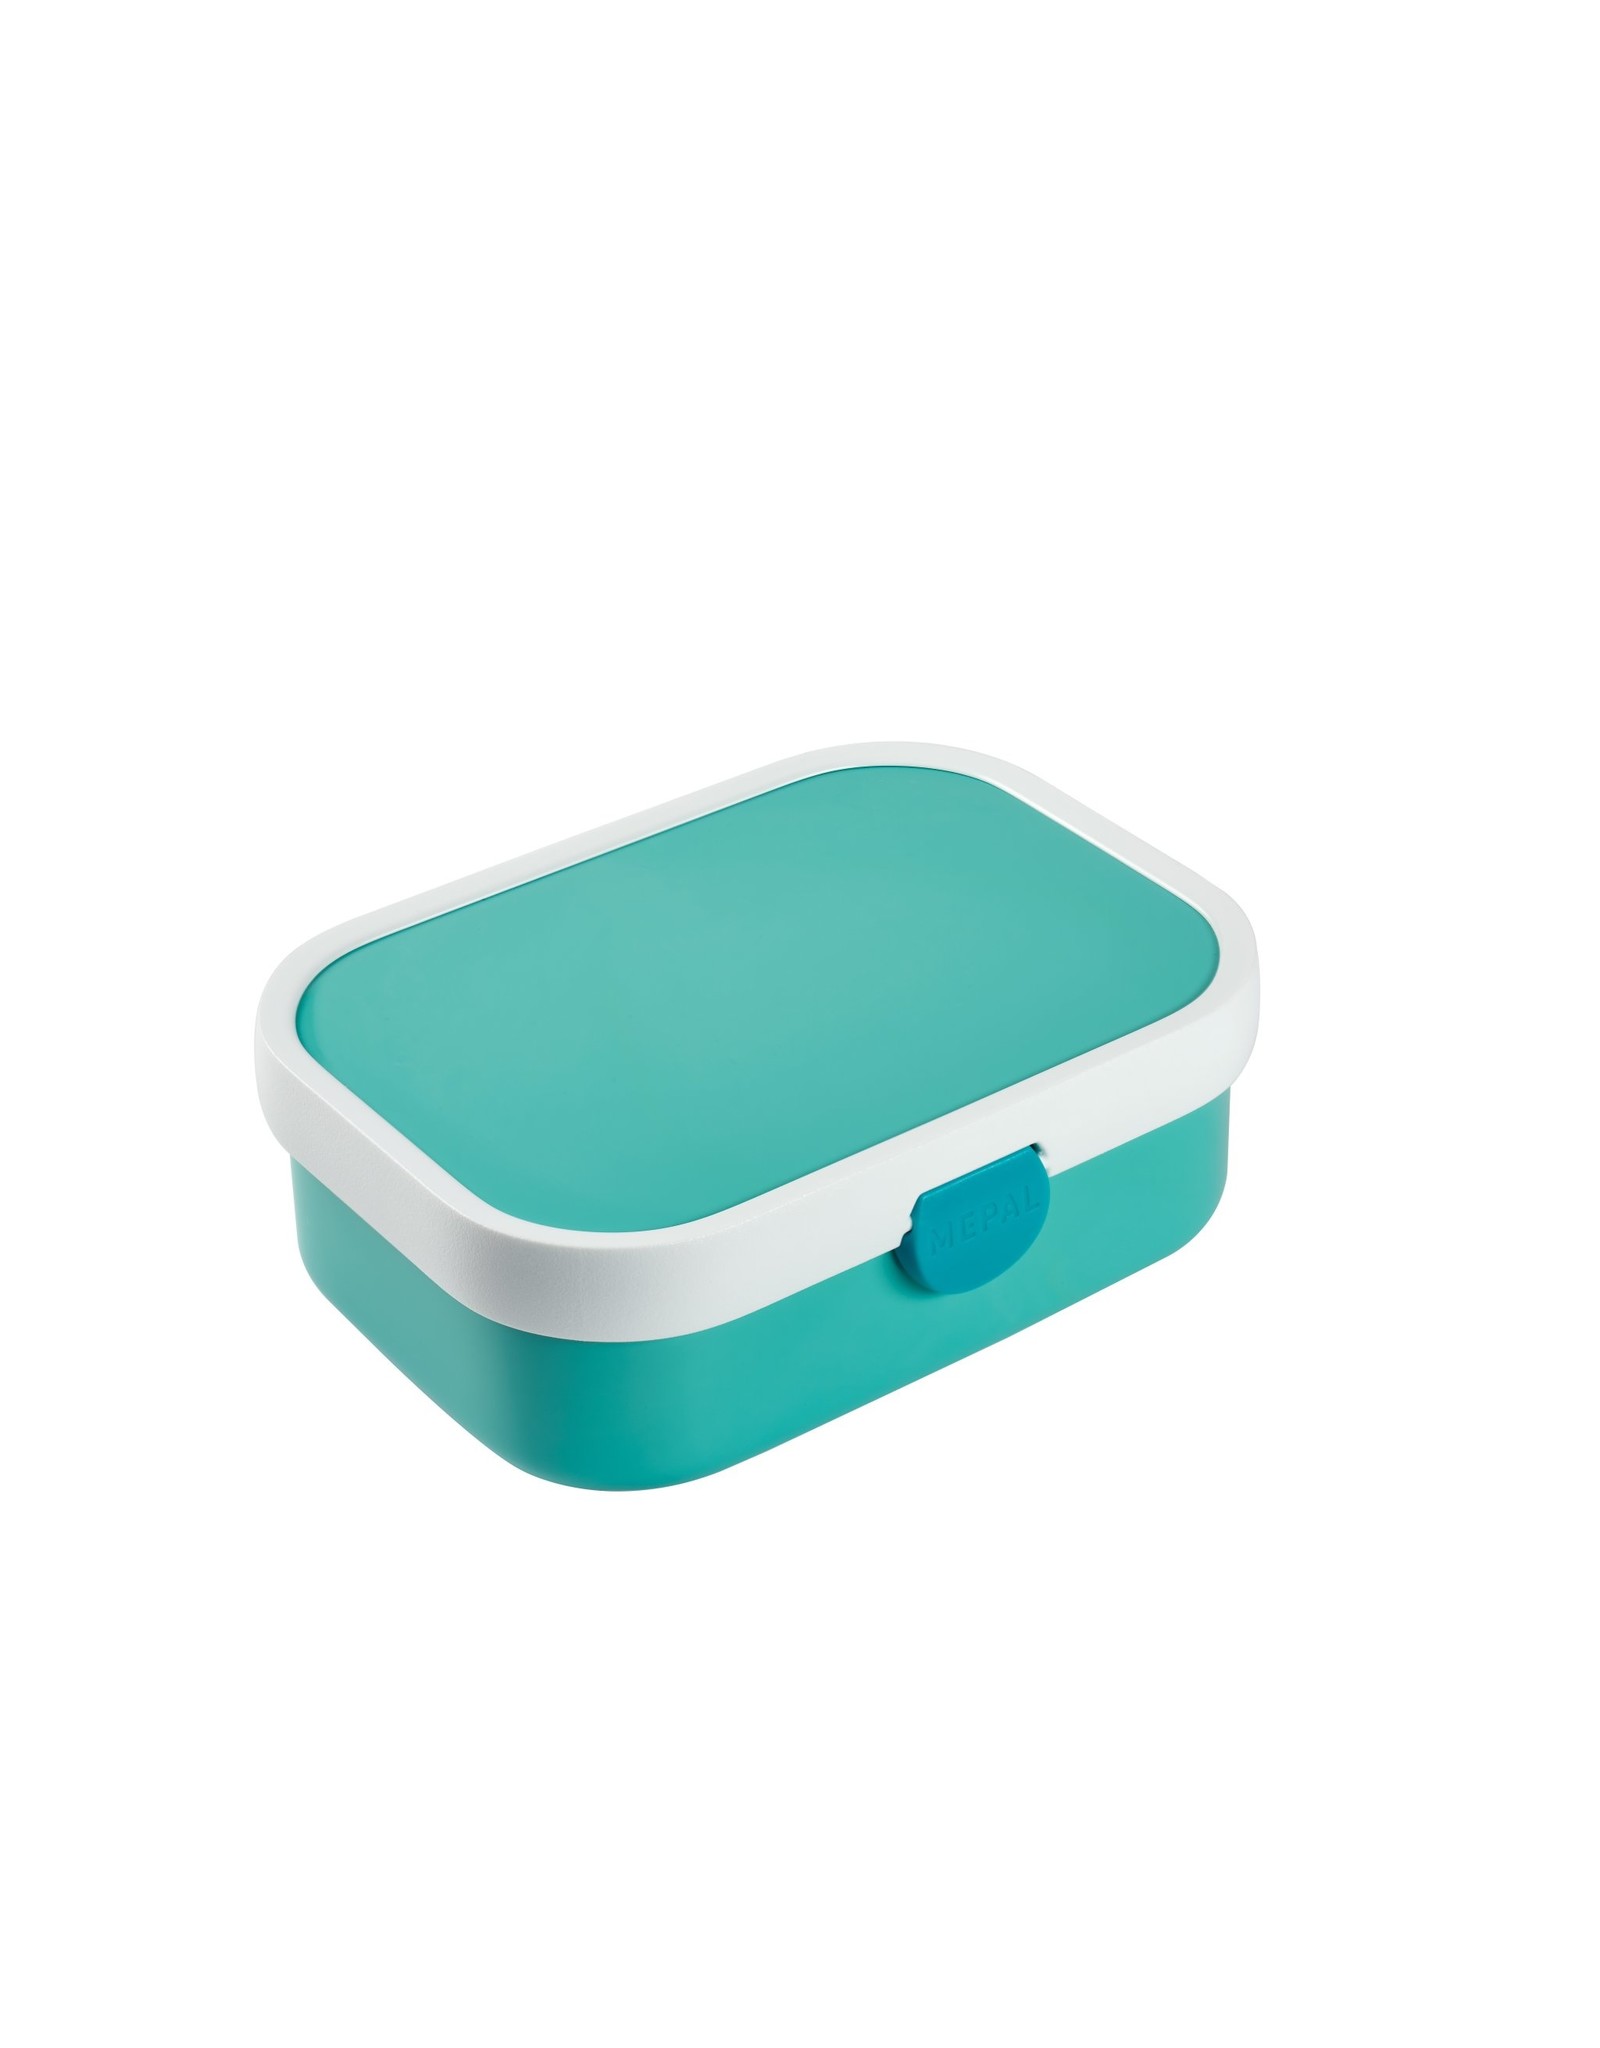 Mepal Mepal Lunchbox Campus - Turquoise